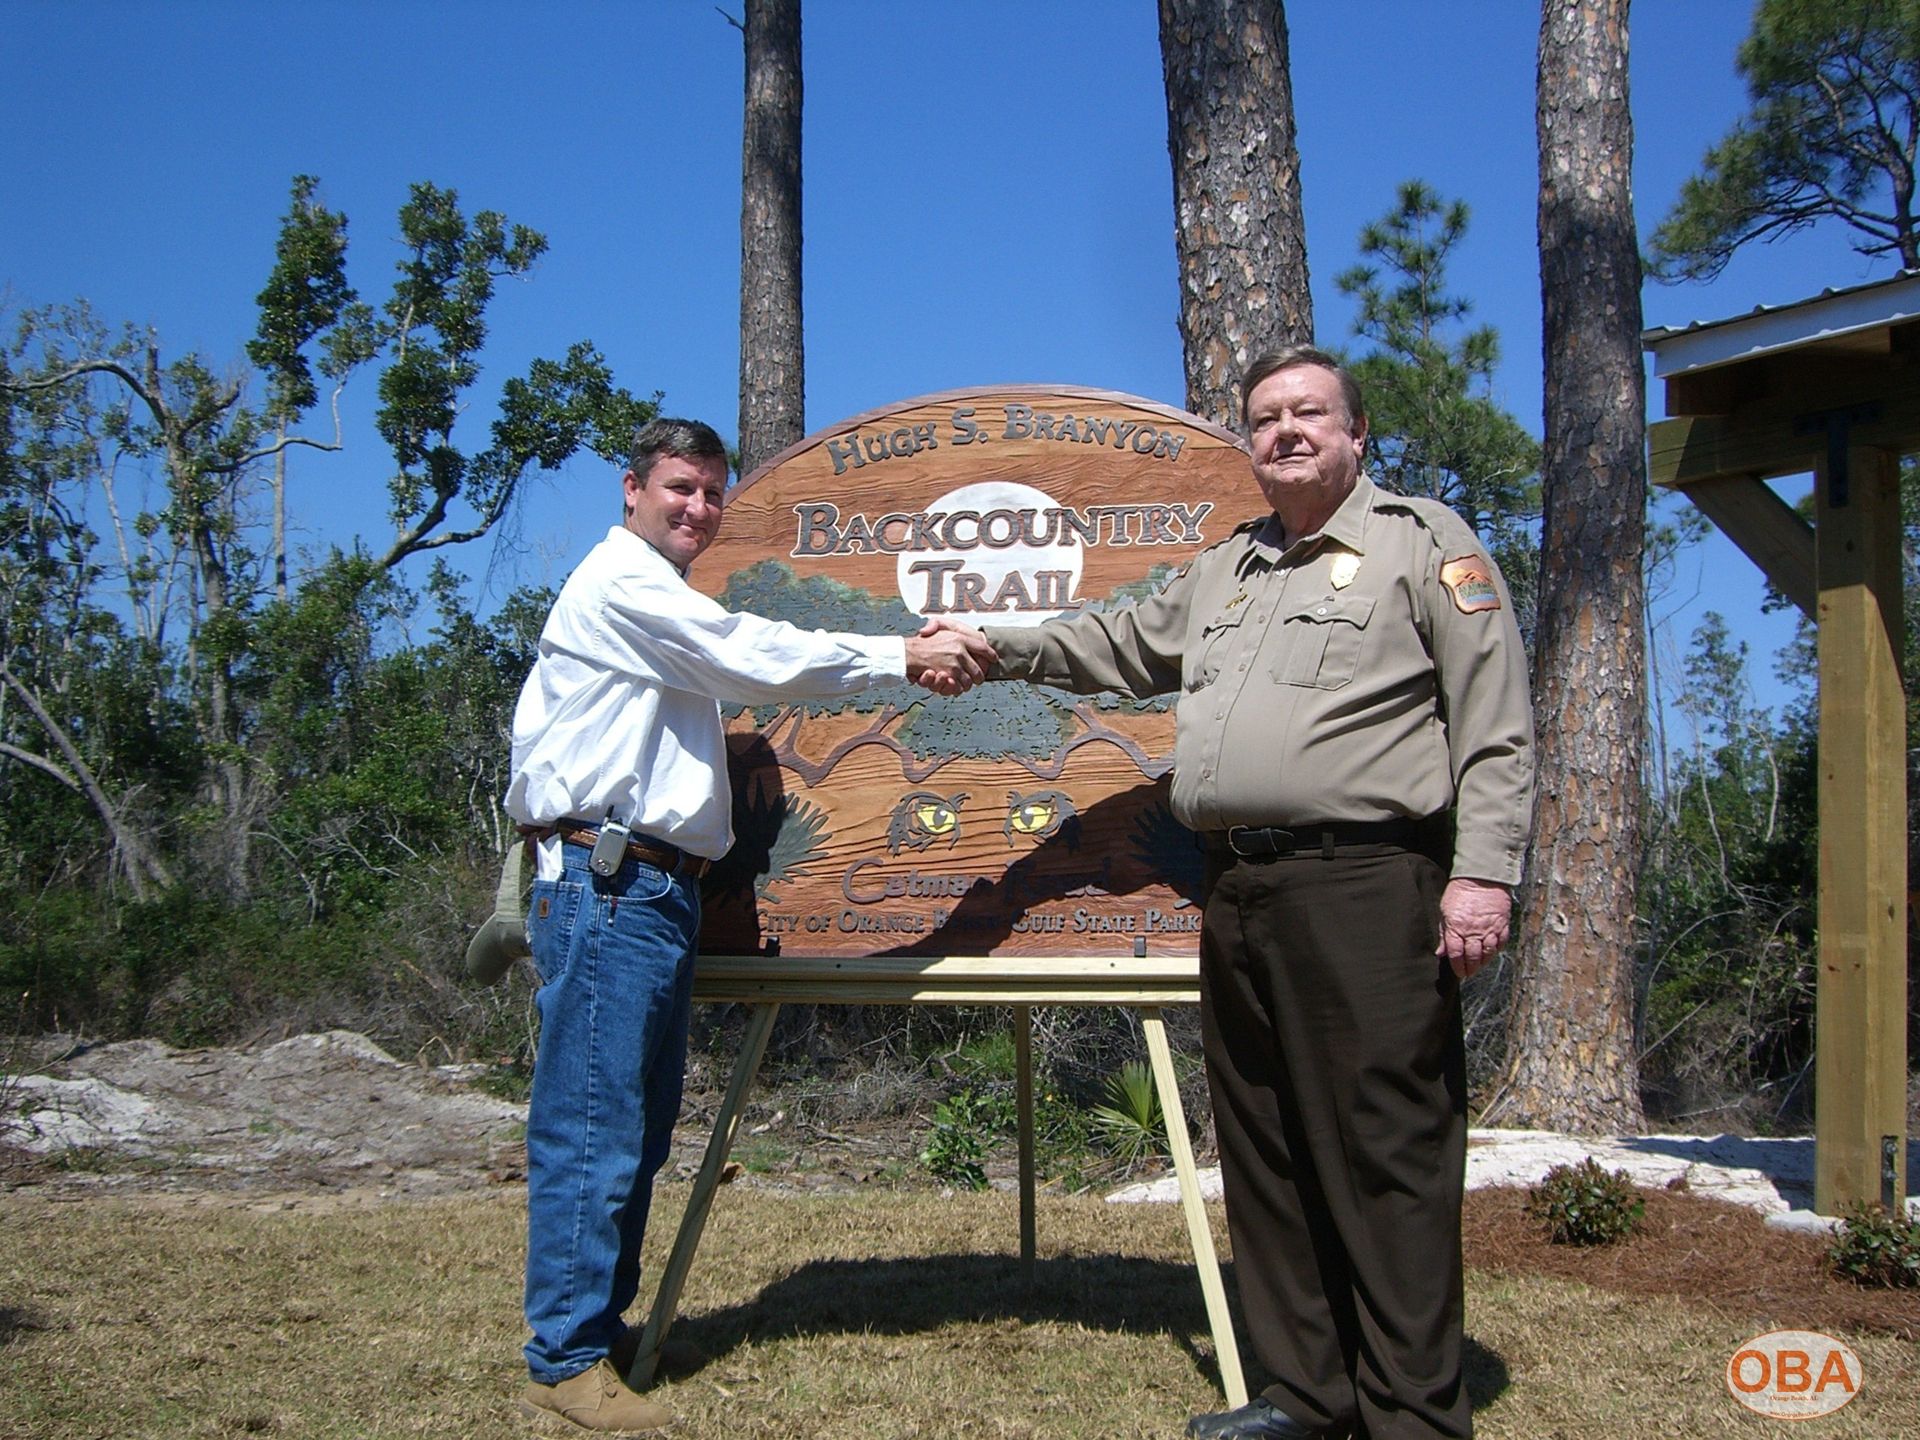 Phillip West and Hugh S. Branyon at trail dedication. Photo by R. Ken Cooper